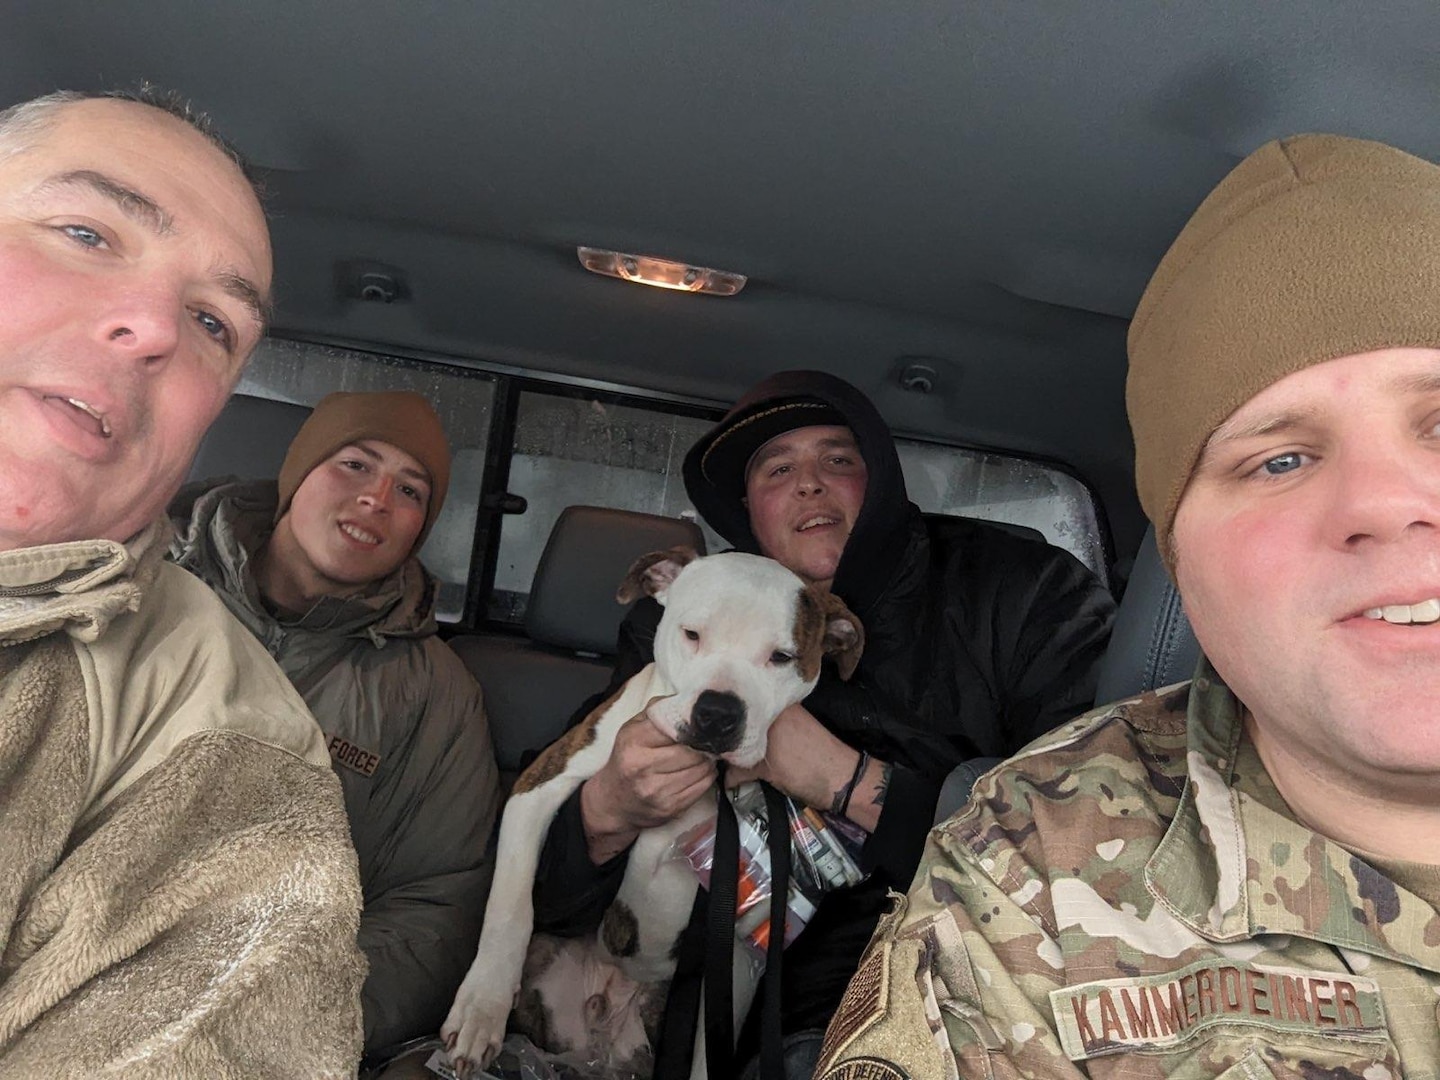 New York Air National Guard Airmen assigned to the 107th Attack Wing at Niagara Falls rescue a motorist and his dog from high snow drifts near Buffalo, New York, Dec. 24, 2022, during a blizzard.